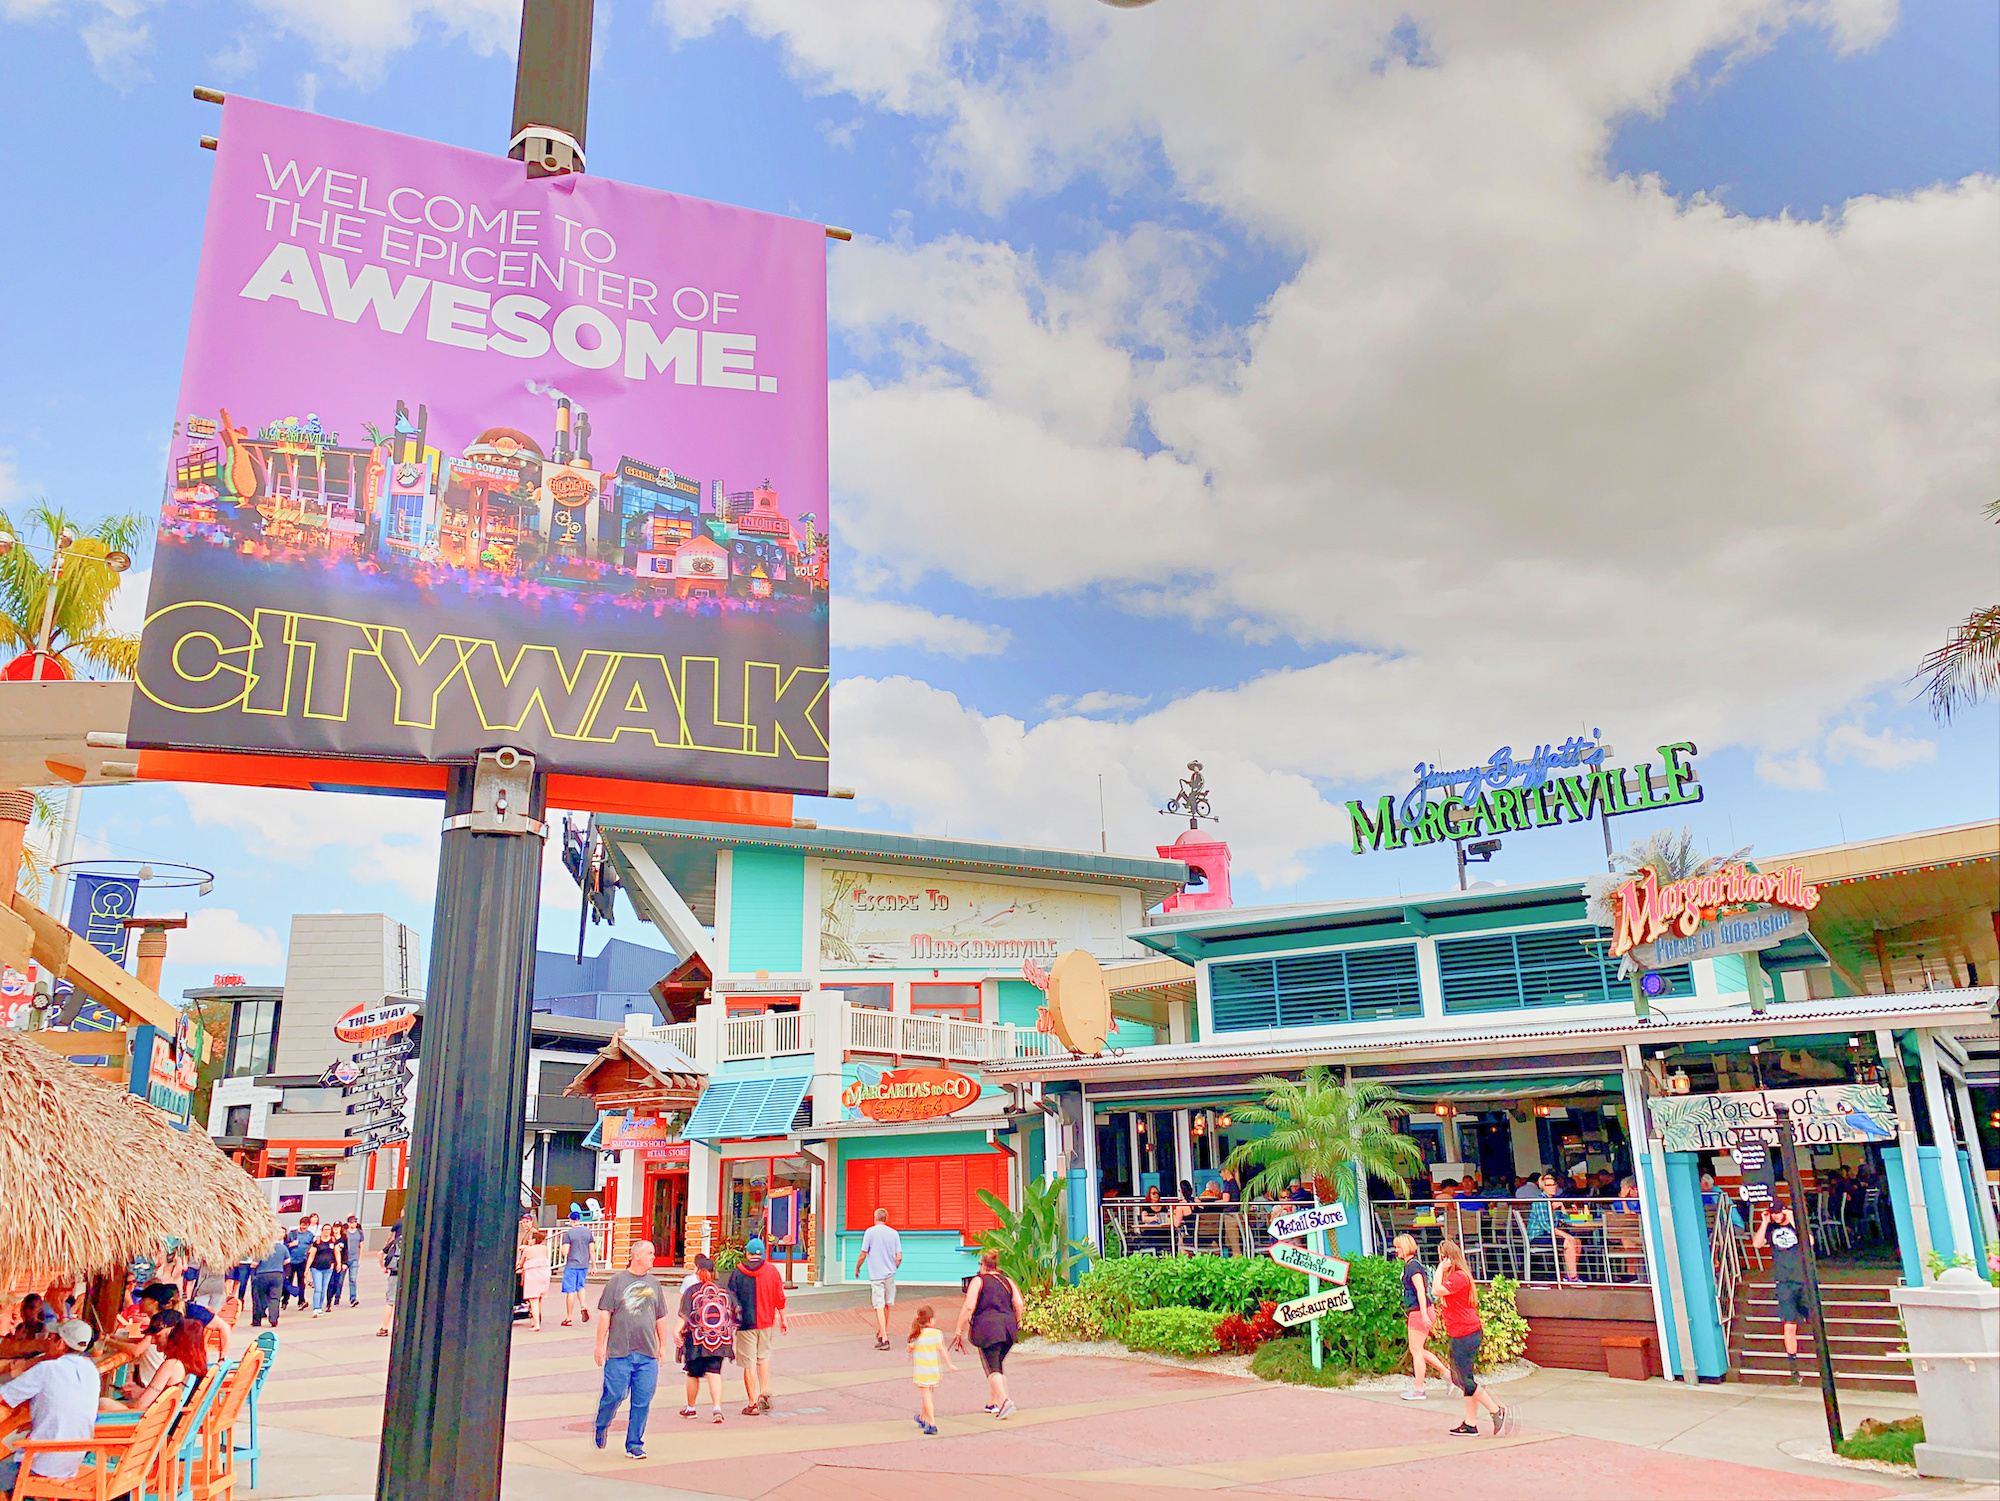 Top 5 reasons CityWalk is better than Downtown Disney - OI Blog